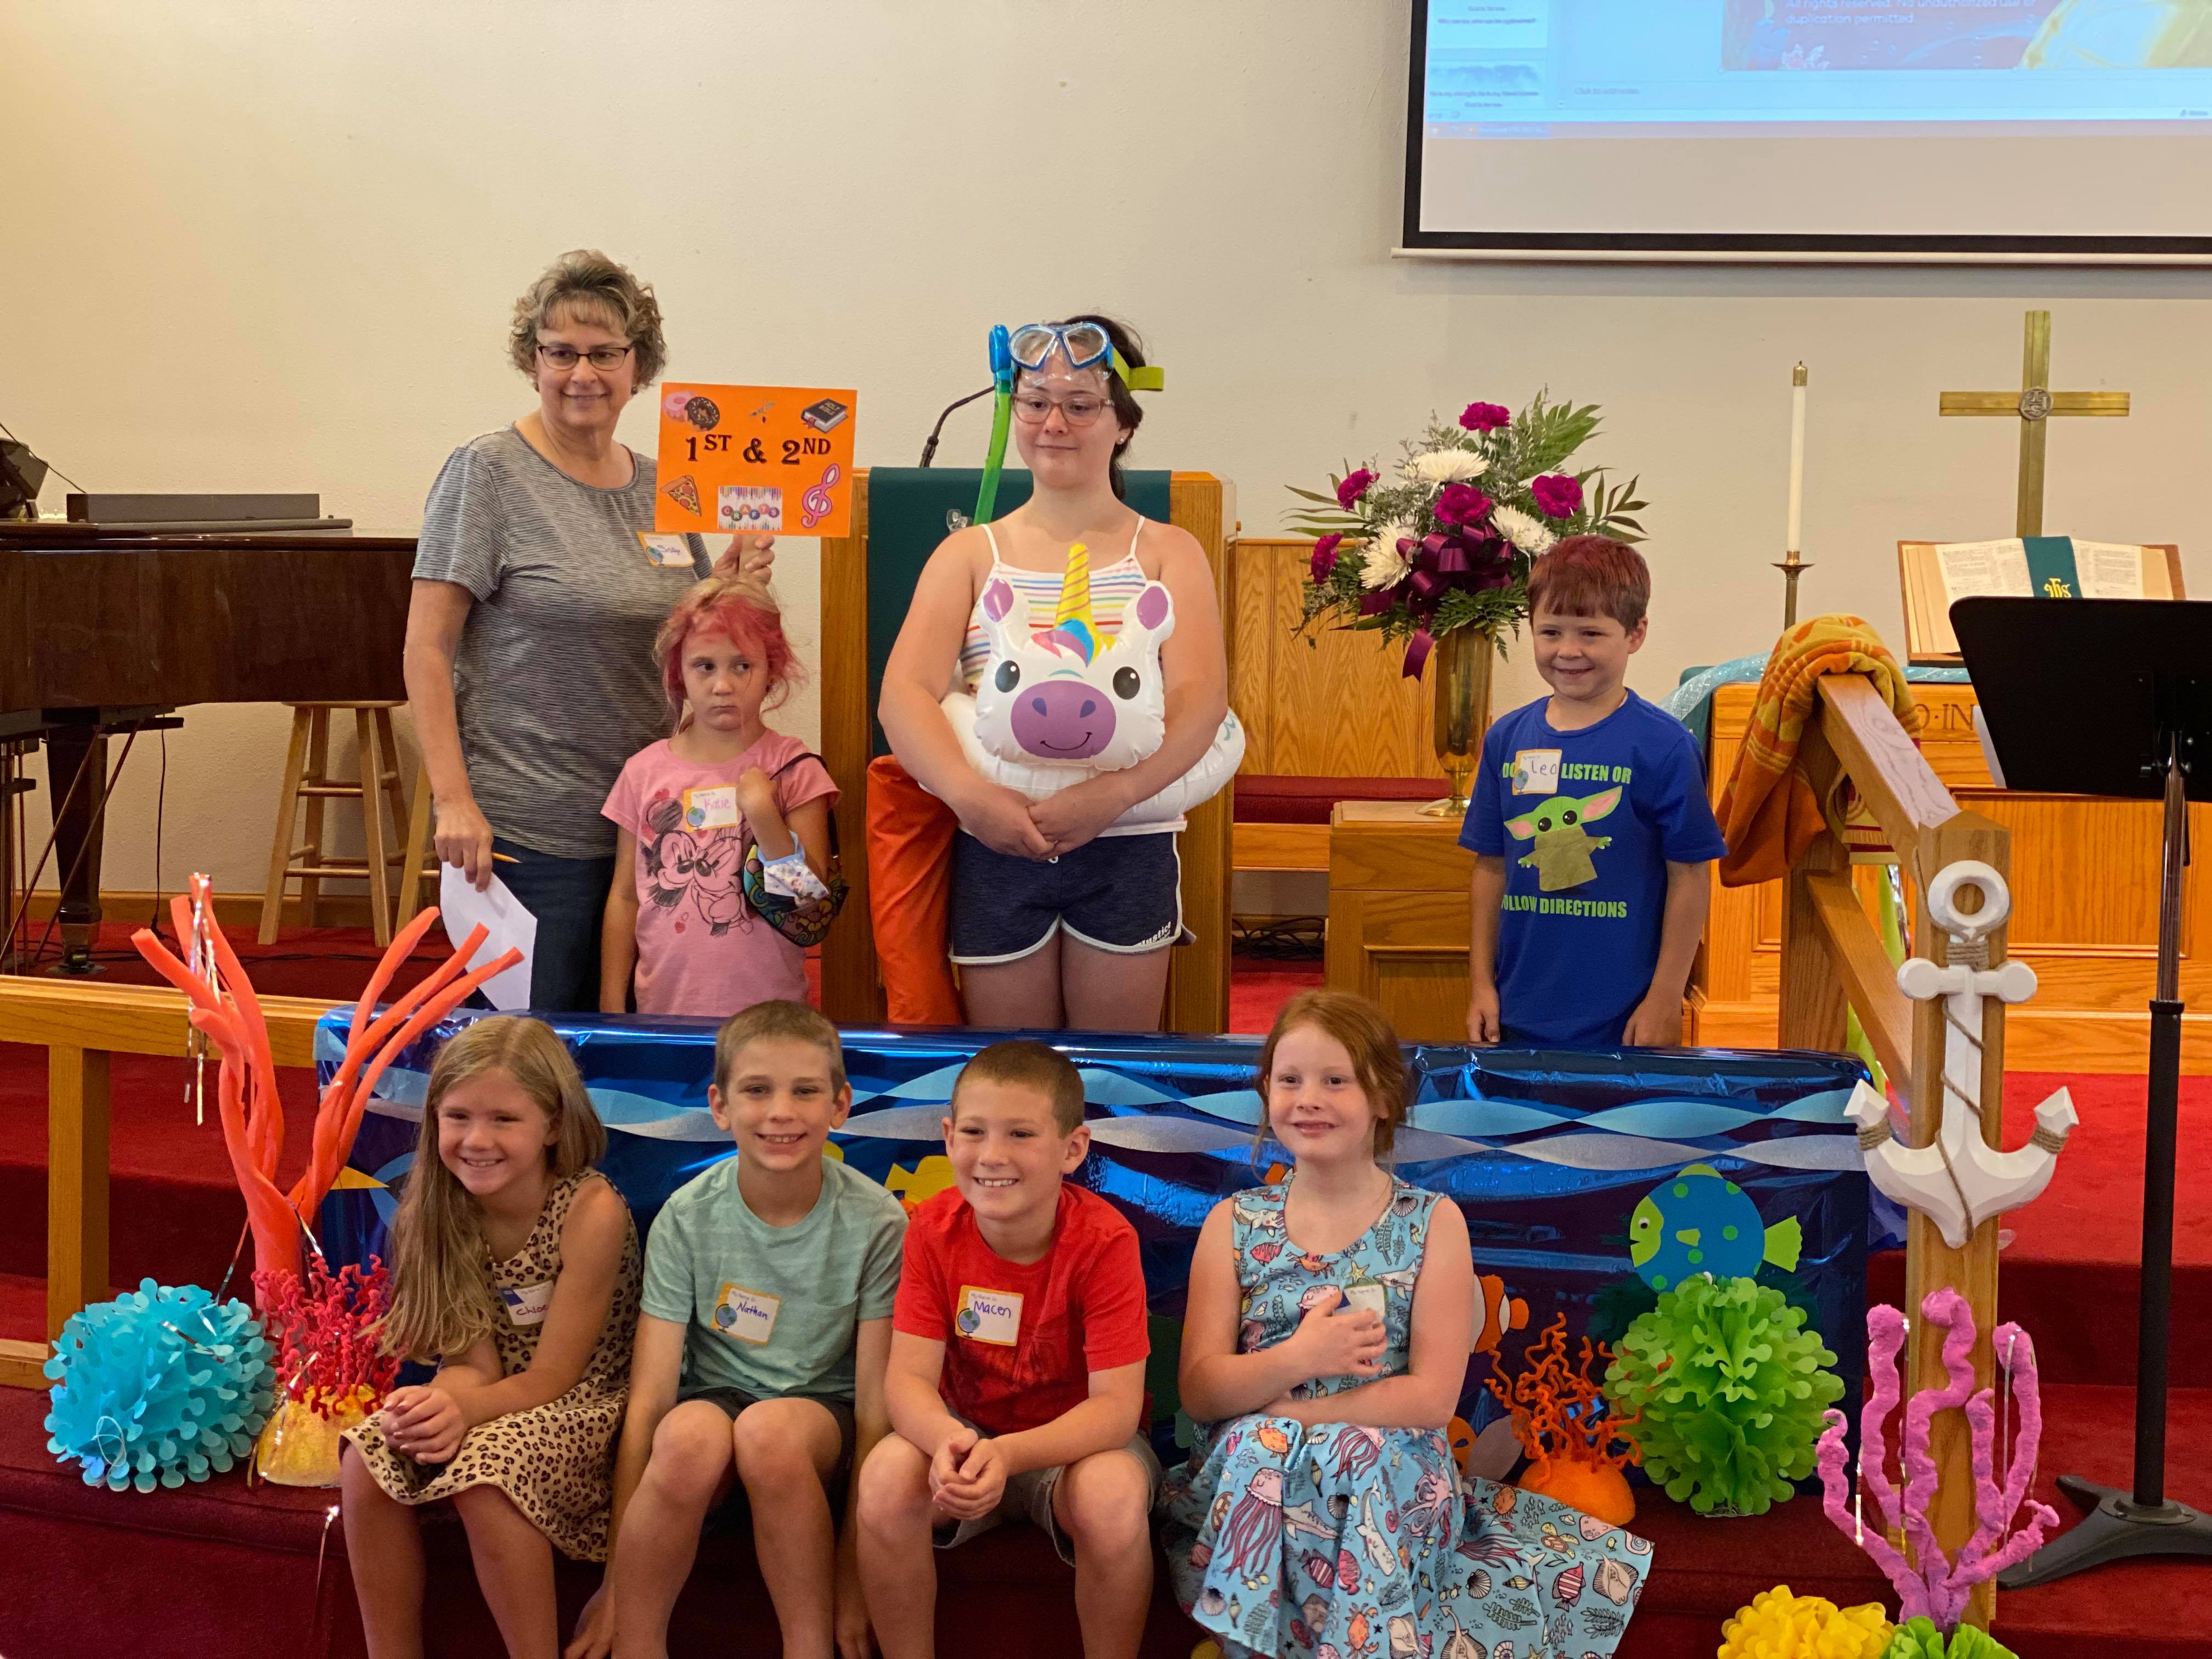 1st and 2nd grade vbs kids with diver dee dee and Sissy